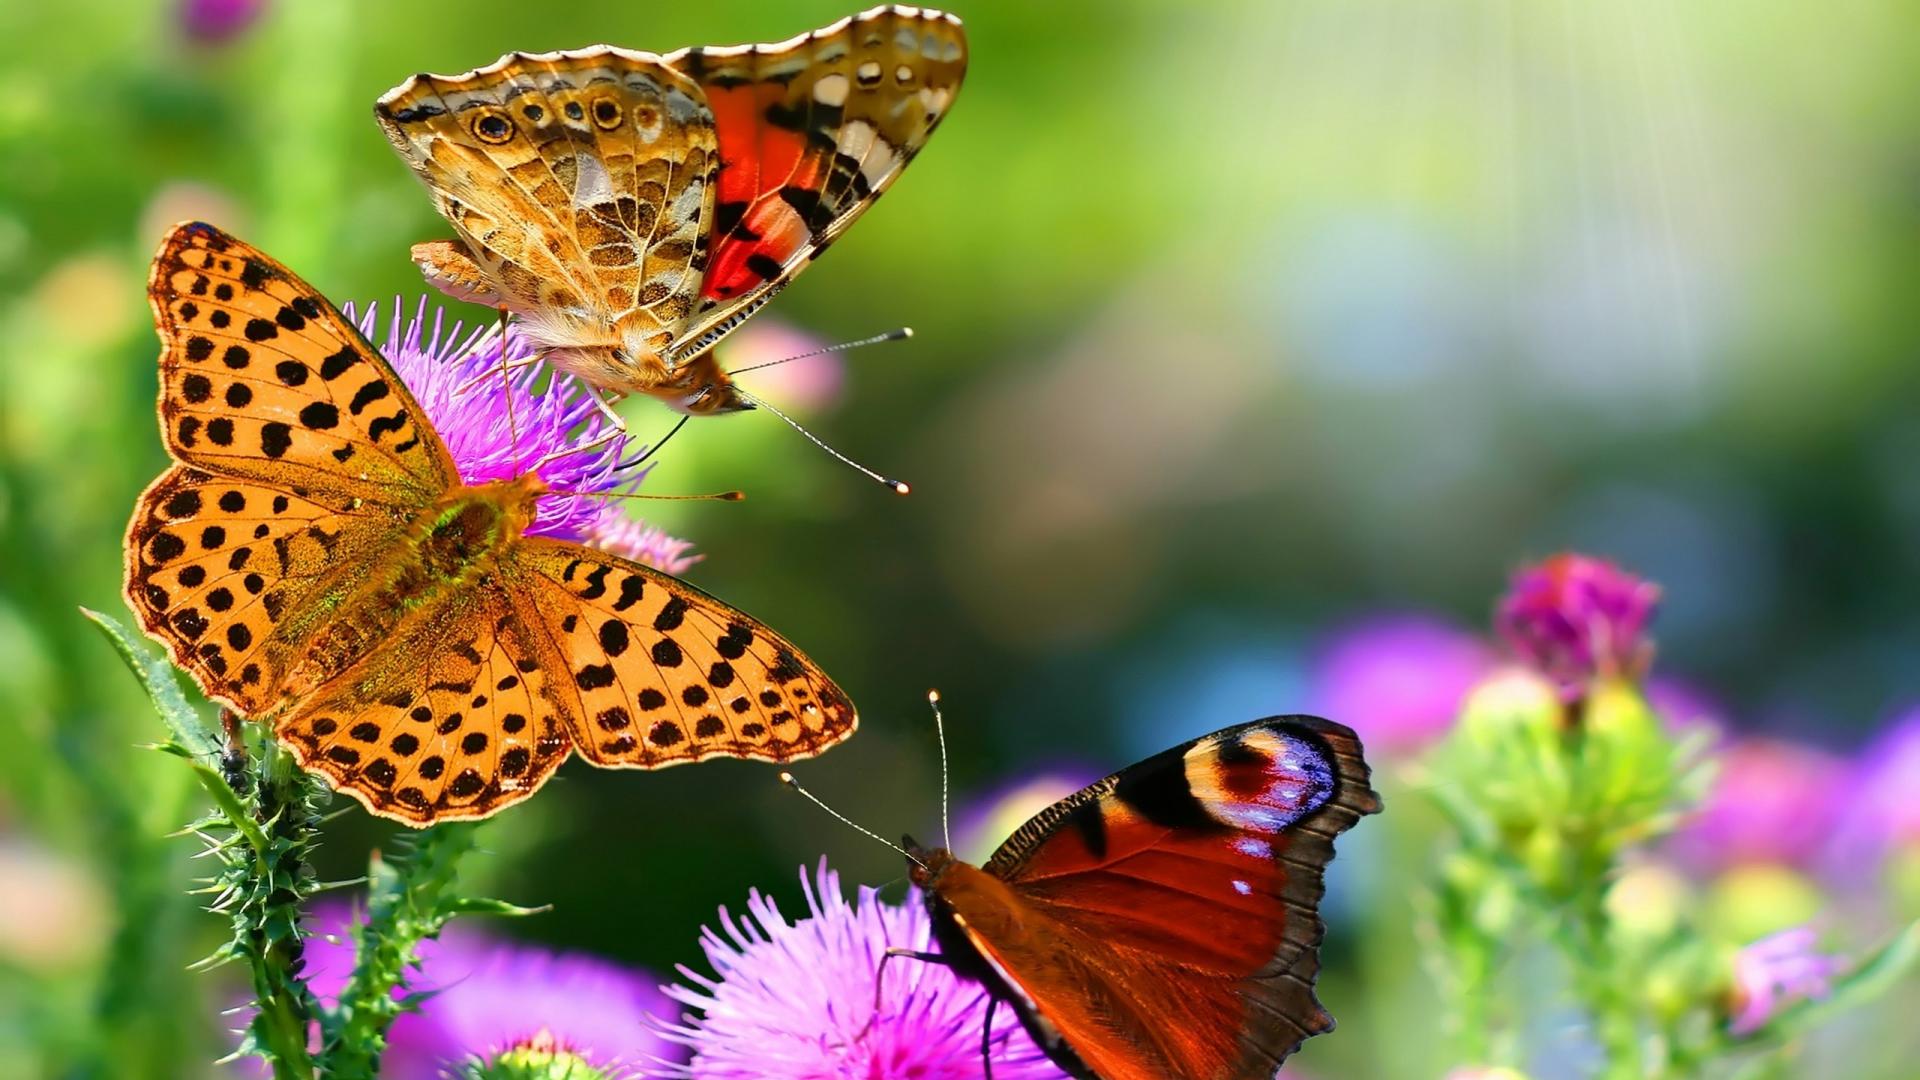 Mobile Desktop Background Butterfly Pictures Wallpaper Download